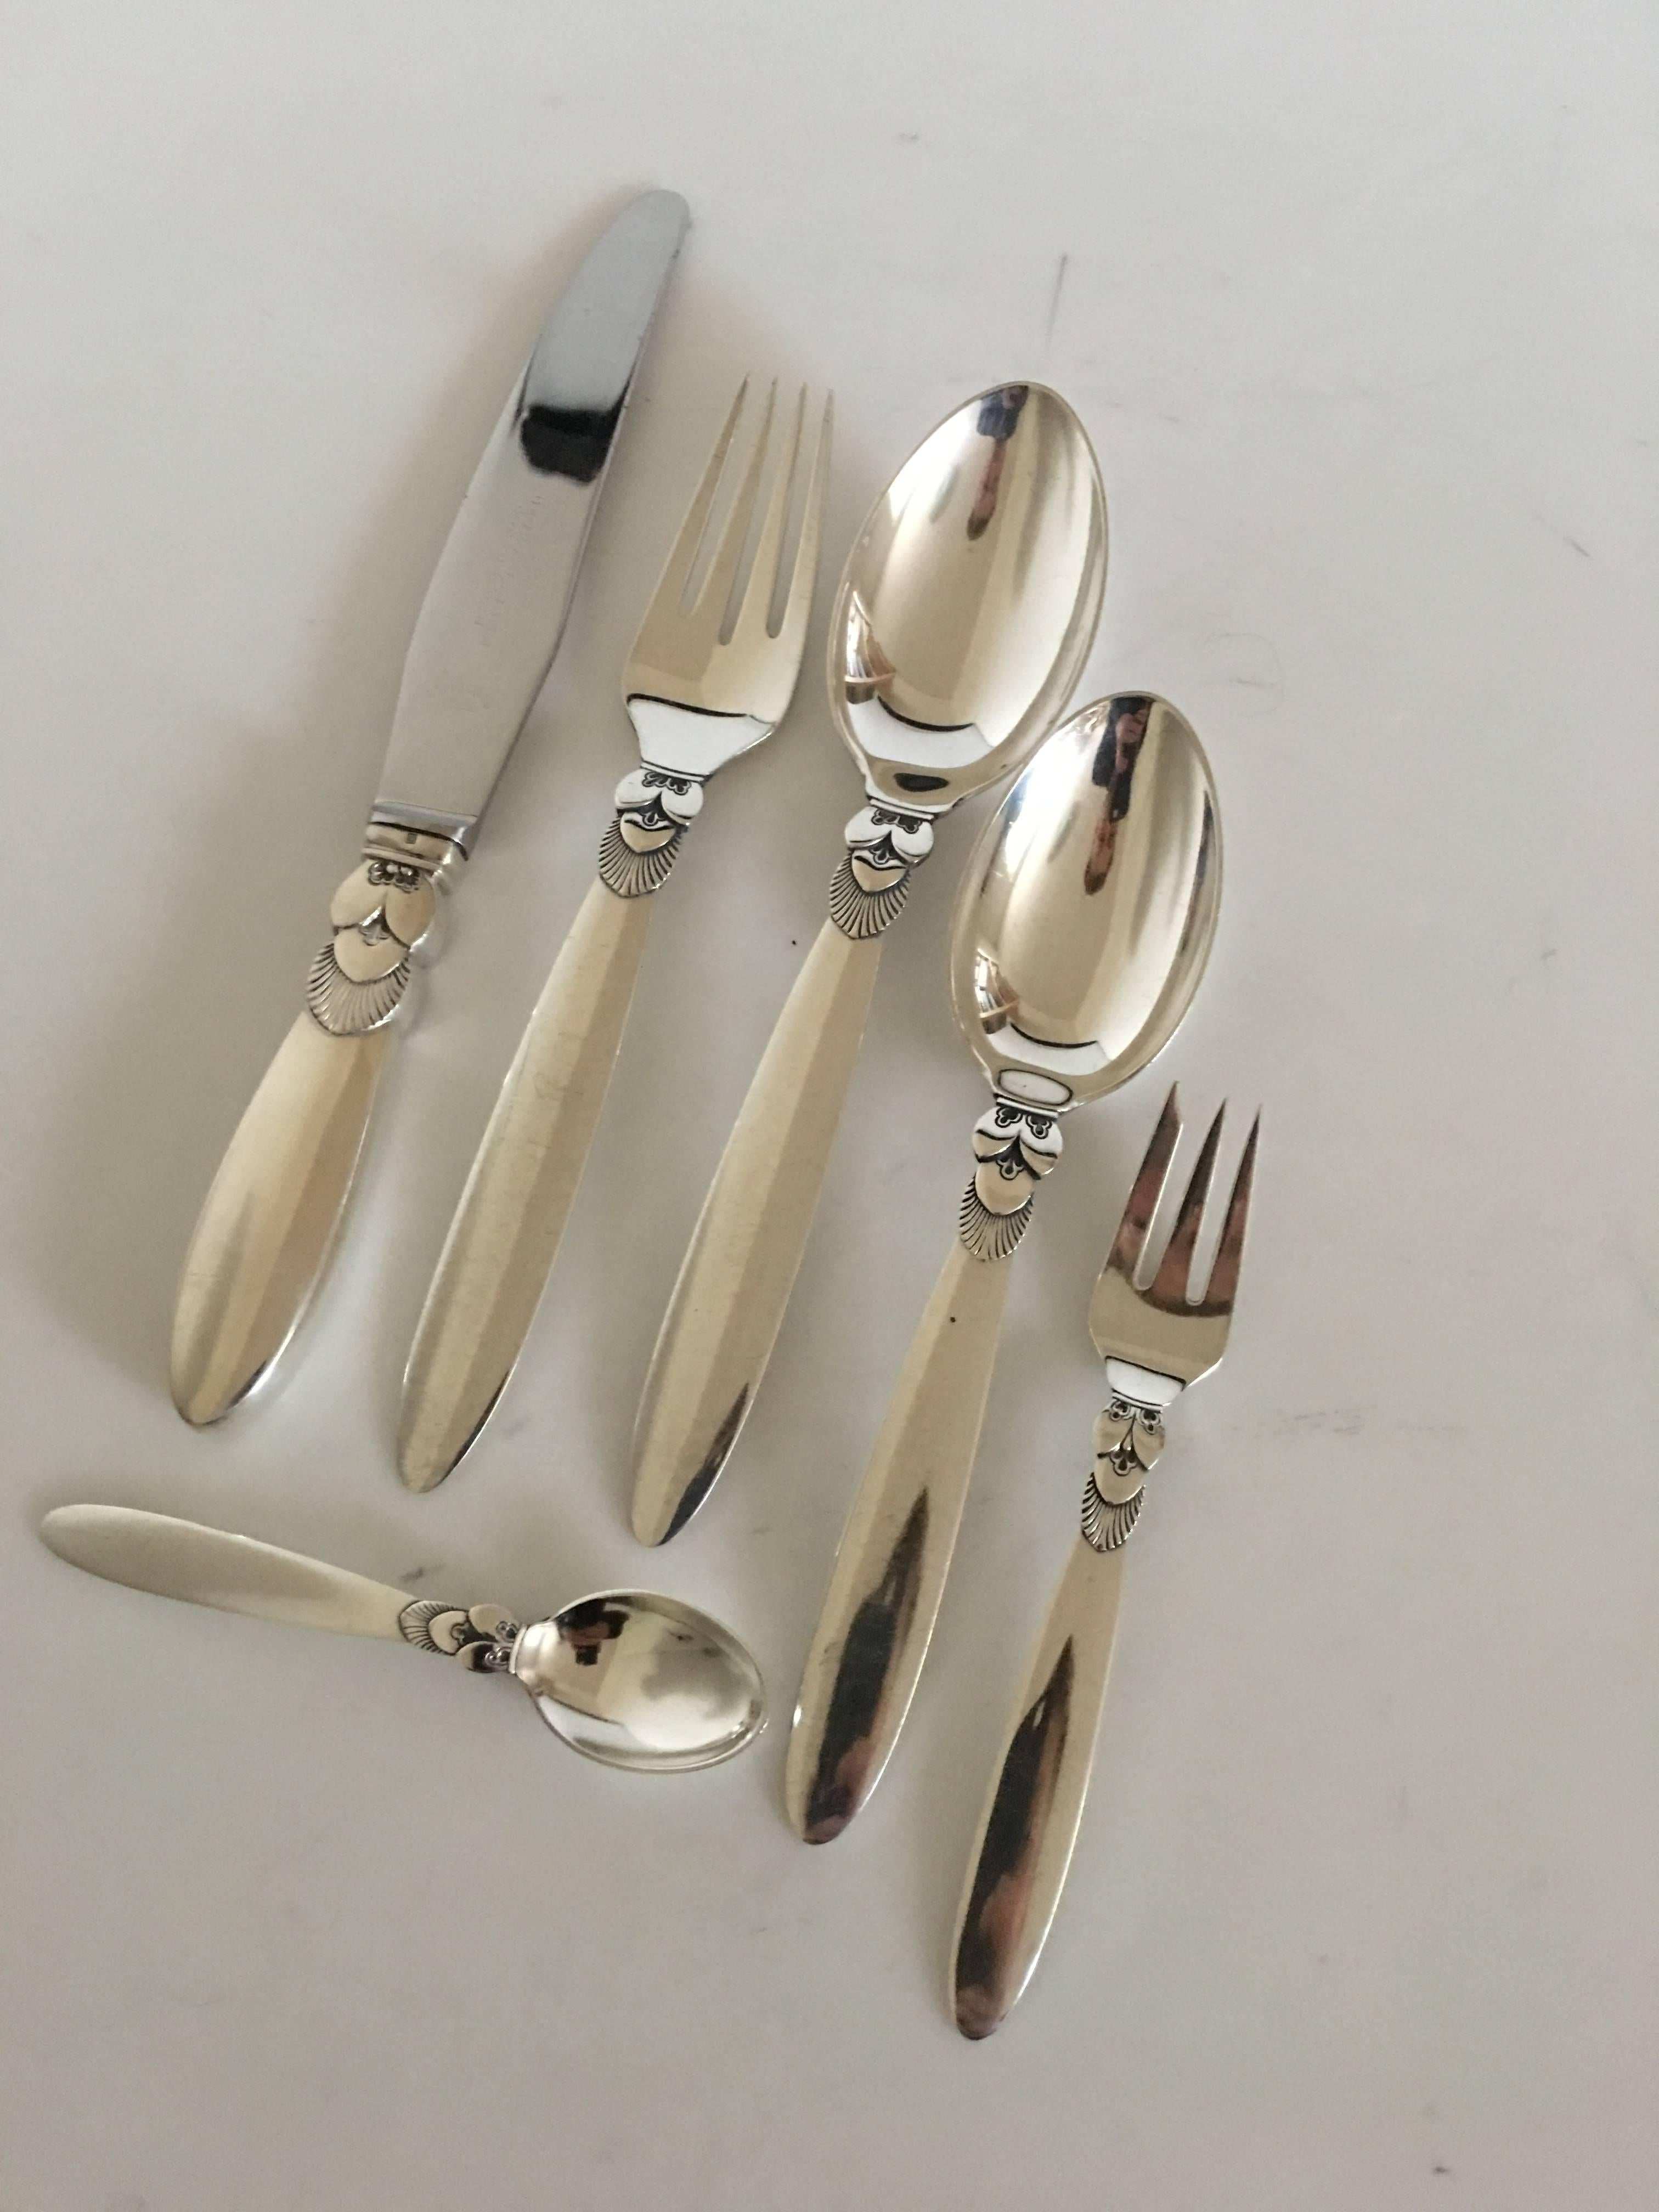 Georg Jensen sterling silver cactus flatware set for 12 People. 72 pieces. Design by Gundorph Albertus, 1930.

The set consists of the following items: 

12 x dinner knives no. 013 22.9 cm L (9 1/64